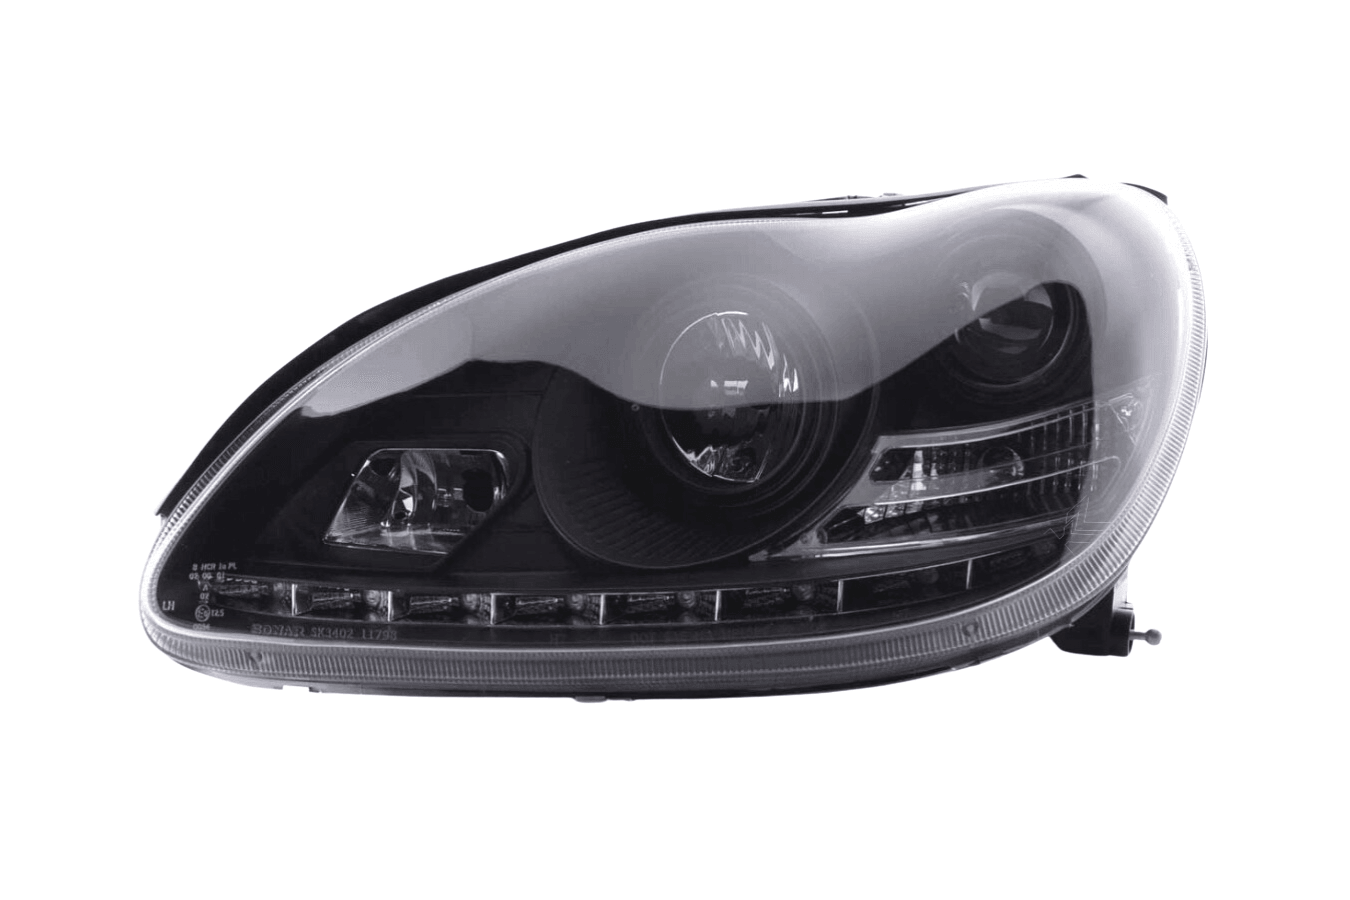 Mercedes Benz S-Class (220) Black LED Headlights with Daytime Running Lights (2002-2005) - K2 Industries